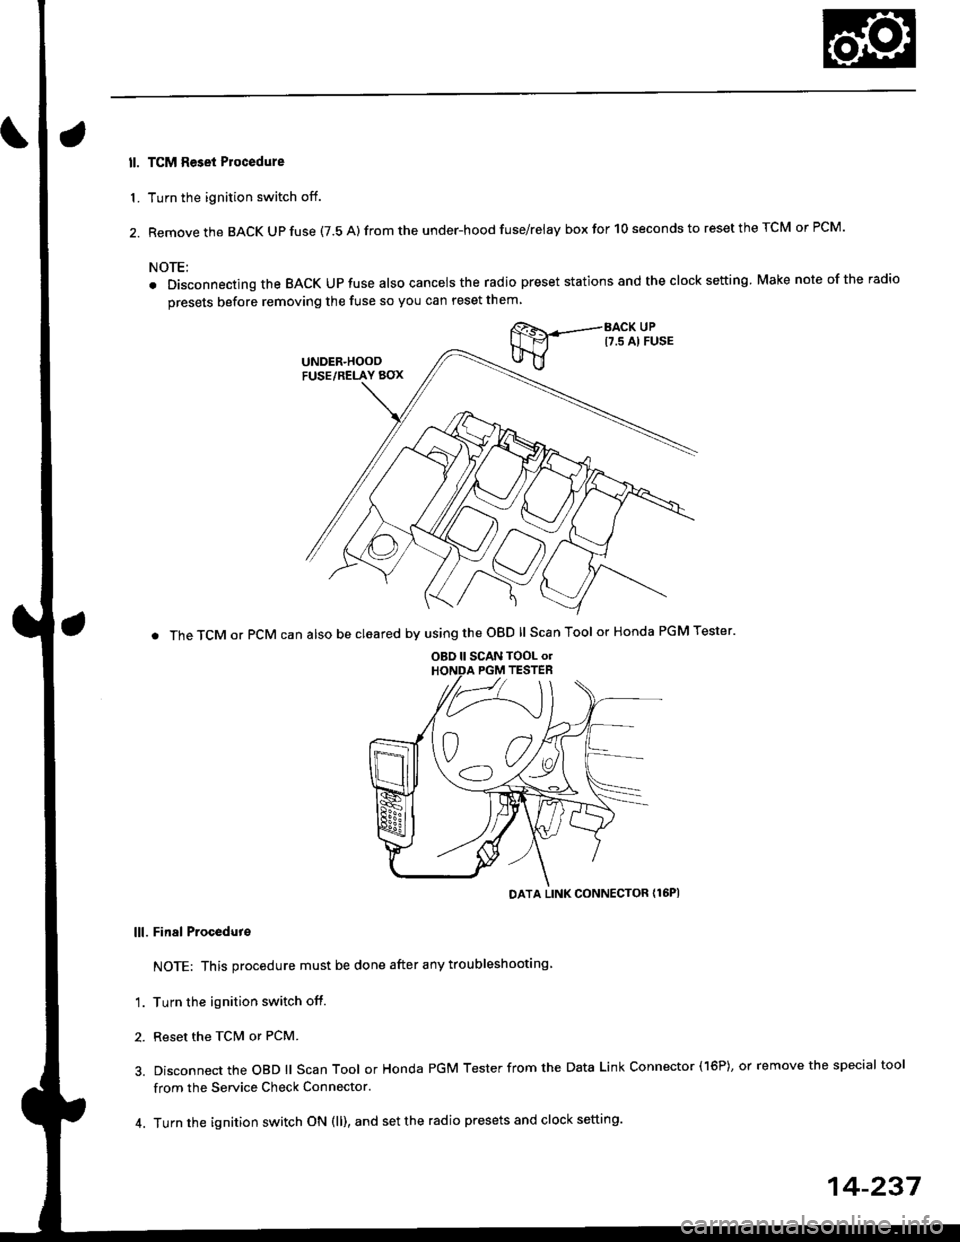 HONDA CIVIC 1999 6.G Workshop Manual ll. TCM Reset Plocedure
1. Turn the ignition switch off.
2. Remove the BACK Up fuse (7.5 A) from the under-hood fuse/relay box for 10 seconds to reset the TCM or PCM.
NOTE:
. Disconnecting the BACK UP